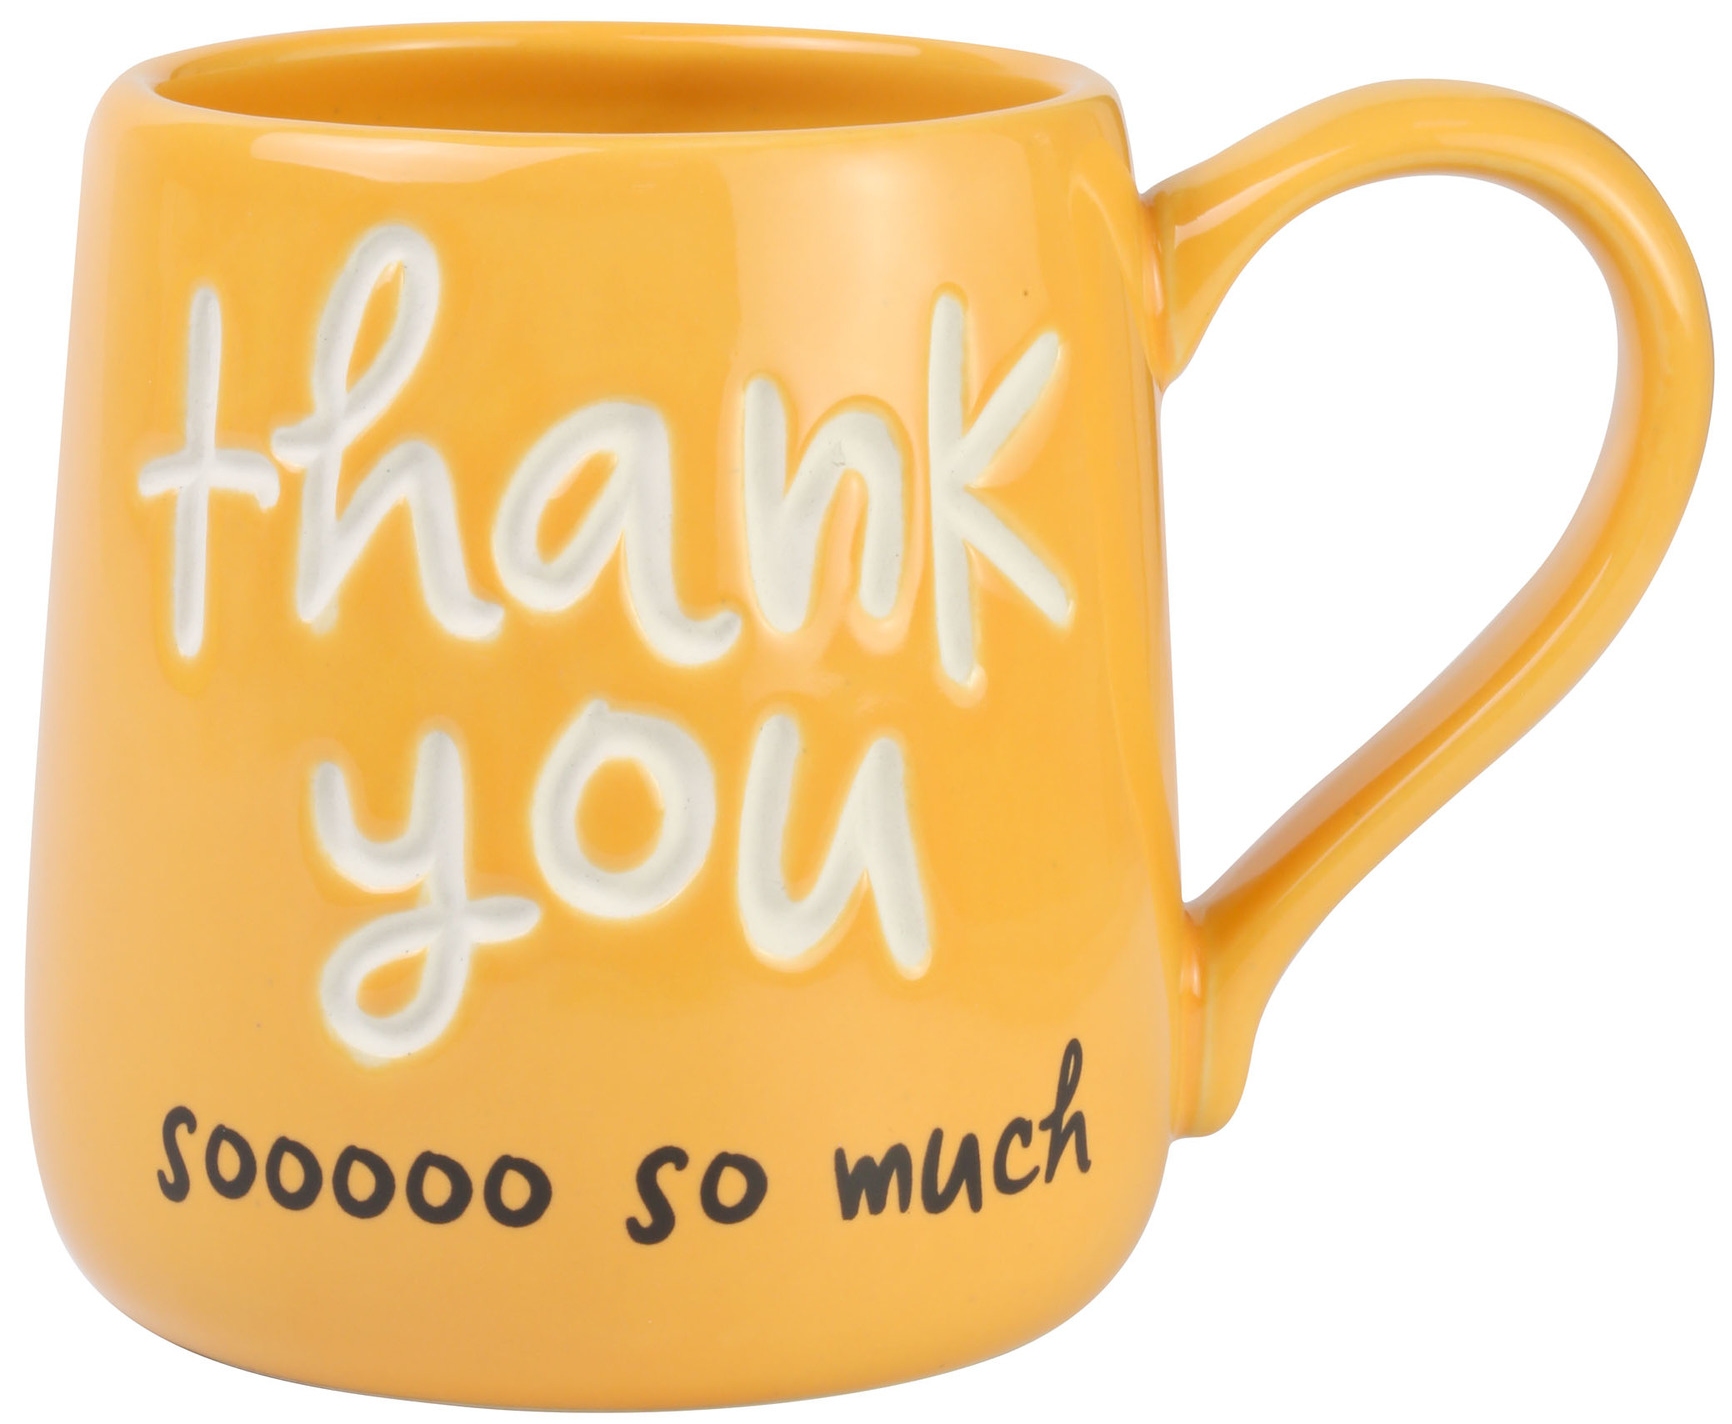 Our Name Is Mud 6008021 Thank You Sooo So Much Mug Set of 2